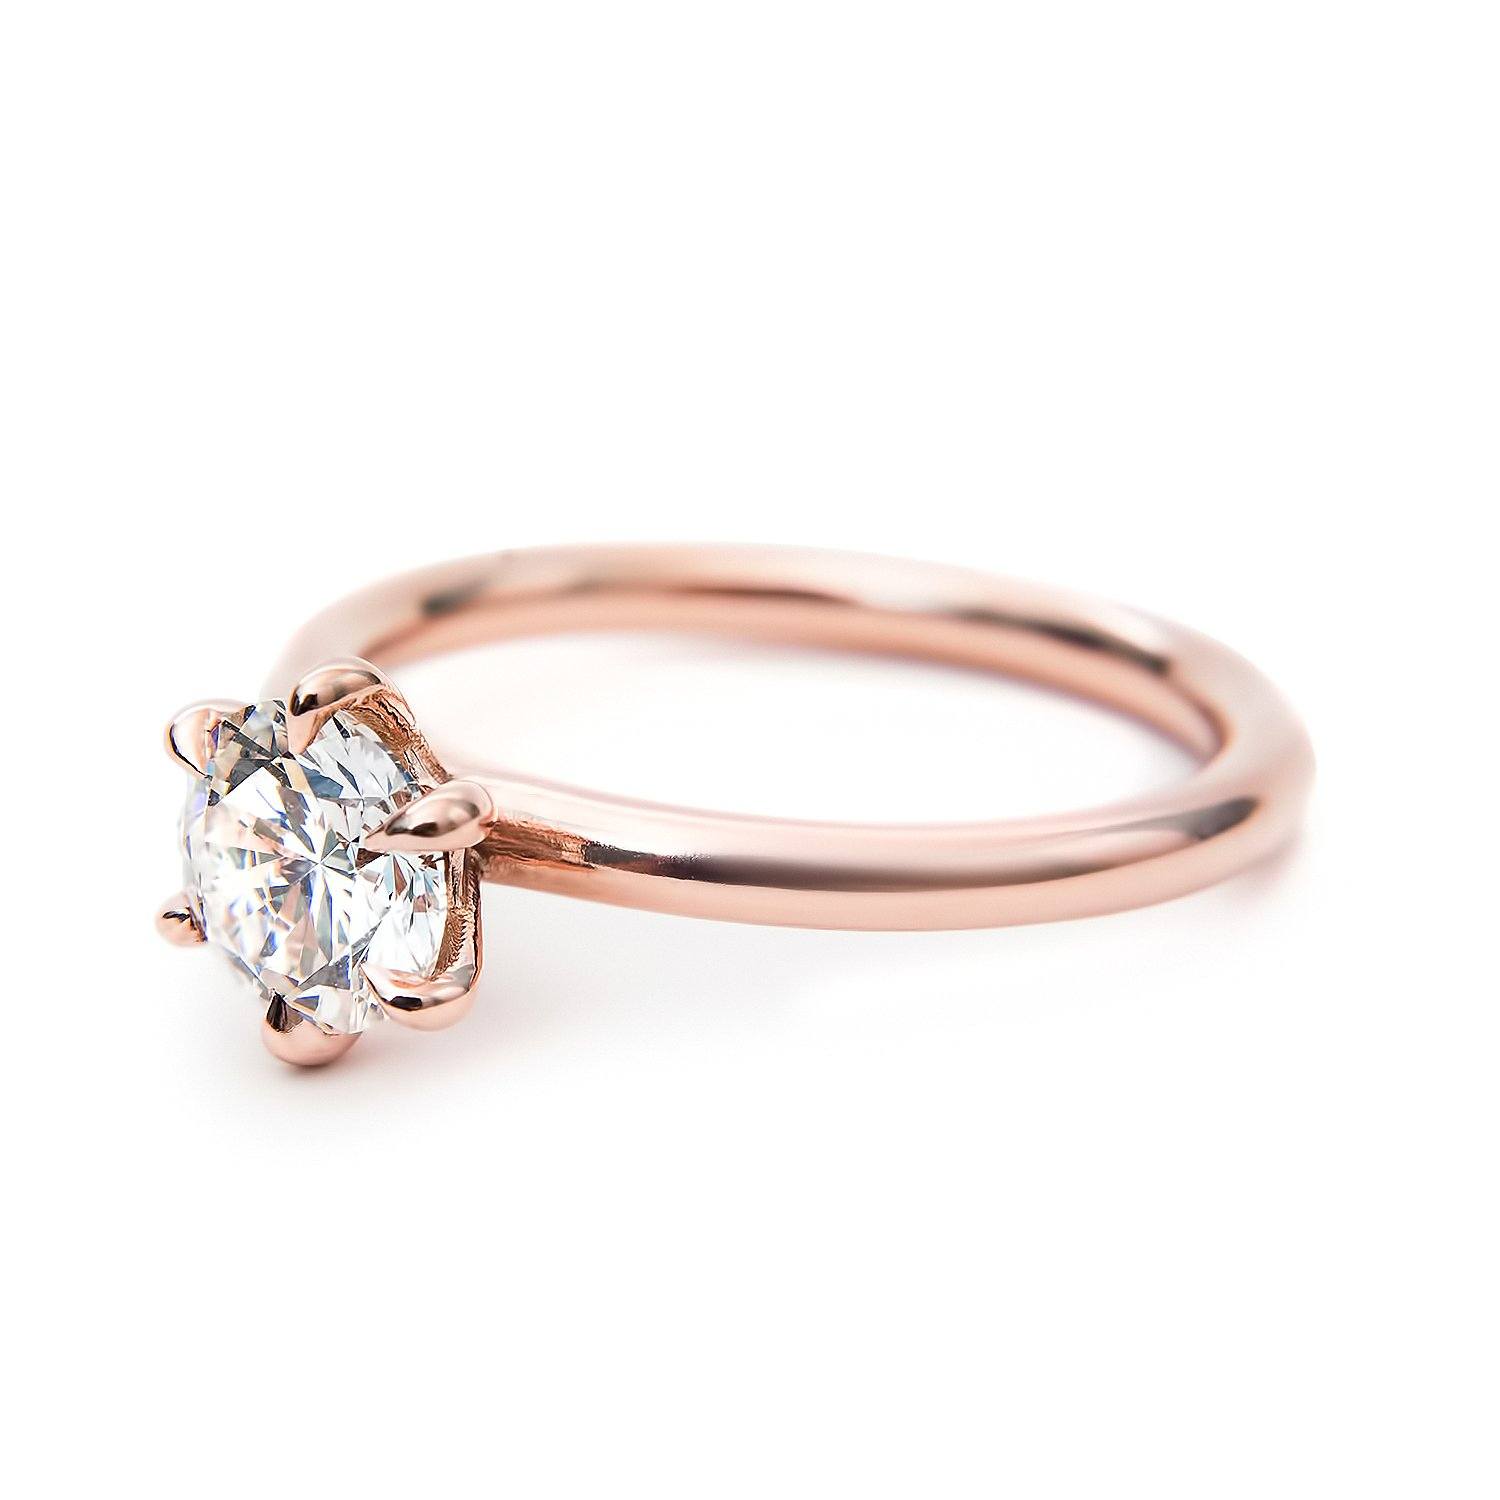 Diamond Foundry solitaire rose gold 6 prong traditional inspired setting